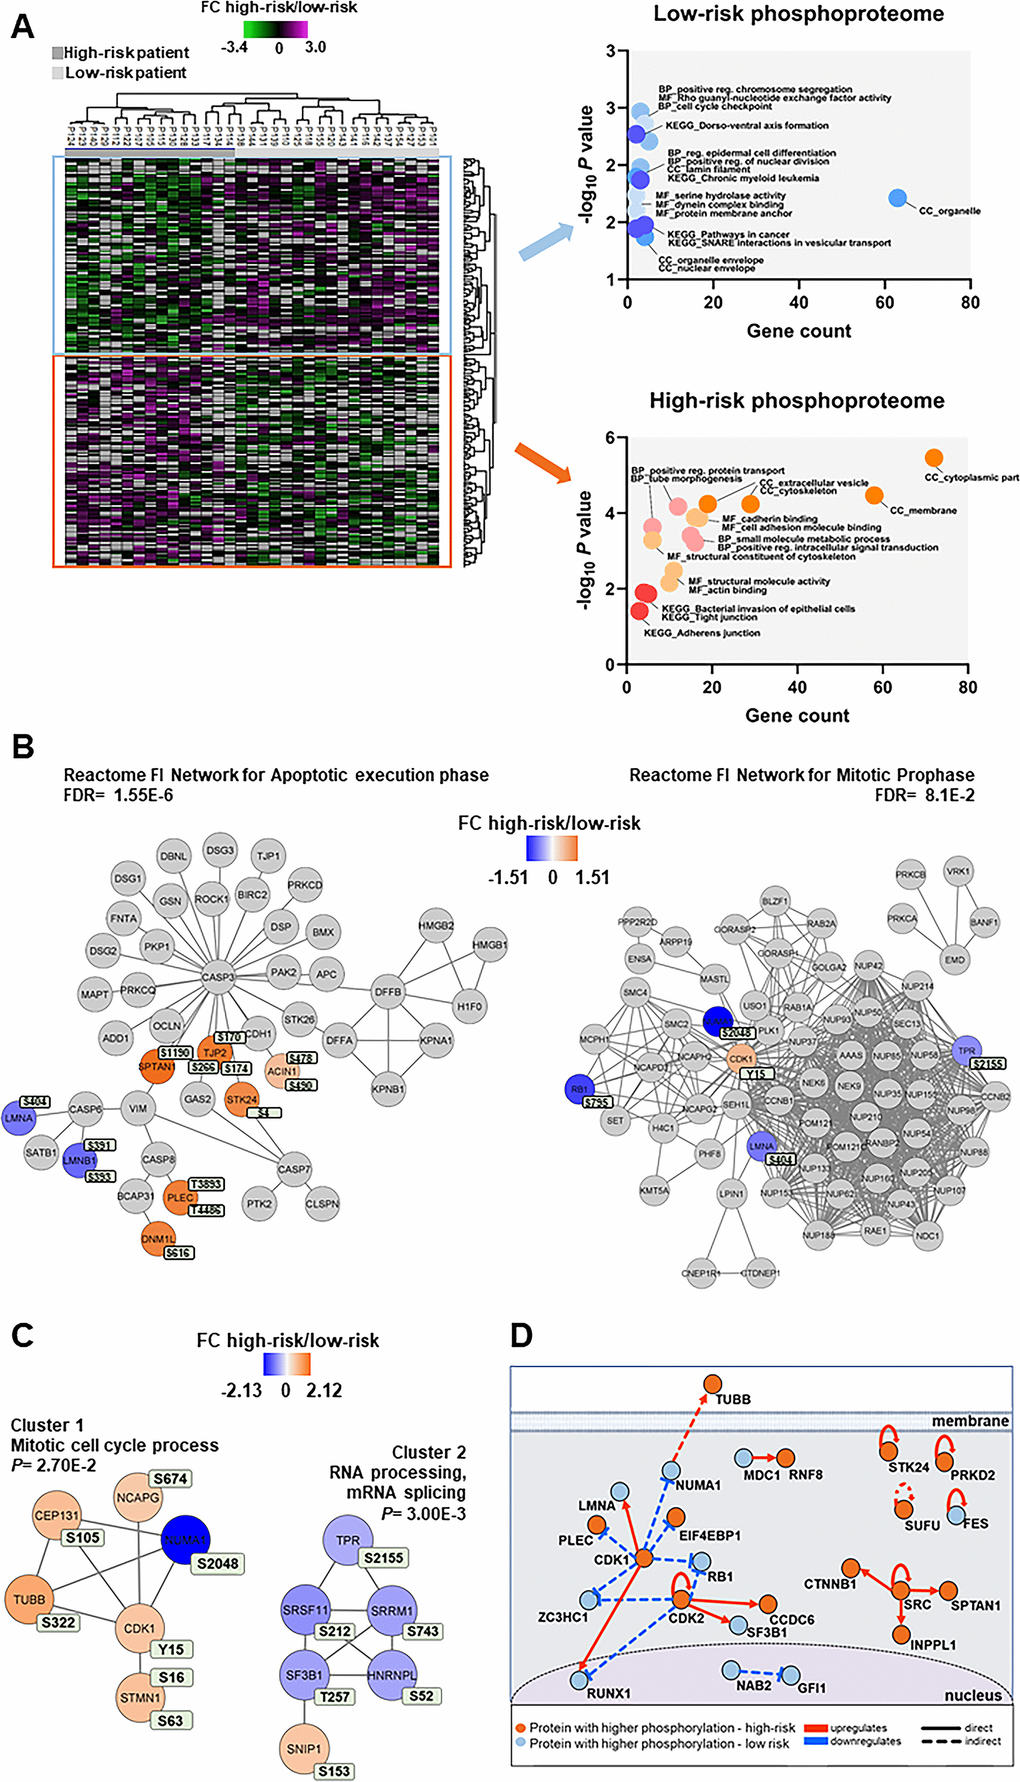 Phosphoproteomic differences between high-risk and low-risk patients; the importance of the cytoskeleton, mitotic cell cycle regulation and CDK activities. (A) Hierarchical clustering of the 33 patients based on the phosphorylation level (SILAC log2 ratio) of 239 phosphosites with significant differences between high-risk and low-risk patient samples. Two vertical main clusters were observed, one dominated by phosphosites with higher phosphorylation in low-risk patients (upper cluster) and the other by phosphosites with higher phosphorylation in high-risk patients (lower cluster). GO and KEGG pathways analyses of the two corresponding phosphoprotein clusters were performed to reveal enriched BP, CC and MF terms in the high-risk and low-risk patient samples. The various enriched GO terms and KEGG pathways are displayed in the scatter plot. The number of genes associated to a specific GO term or KEGG pathways (count) and the corresponding –log10P values are shown on the x-axis and y-axis, respectively. Abbreviations were used in cases of long GO term or KEGG pathway name (reg. for regulation). (B) Visualization of hit Reactome pathways was performed using the ReactomeFIViz app (7.2.3) in Cytoscape. Two significant Reactome networks (FDR vs low-risk log2 phosphorylation FC, i.e. orange indicates increased phosphorylation in the high-risk group and blue increased phosphorylation in the low-risk group. (C) Networks of PPI based on STRING database and visualized in Cytoscape after ClusterONE analysis. The significance of networks with high cohesiveness is shown with the P value of a one-sided Mann-Whitney U test. The differentially regulated phosphorylation sites are shown in light green boxes next to each protein. FC of phosphorylation are color-coded; orange-colored proteins showed a higher phosphorylation in the high-risk group and blue-colored proteins showed a higher phosphorylation in the low-risk group. (D) Causal relationships between phosphoproteins with differentially regulated phosphorylation sites in the high-risk vs low-risk phosphoproteome set was studied with SIGNOR. The analysis showed the pivotal role of CDKs in the control of cell cycle, cytoskeleton and translation phosphoproteins. Nodes and types of relationships are displayed as indicated on the bottom part of the design.